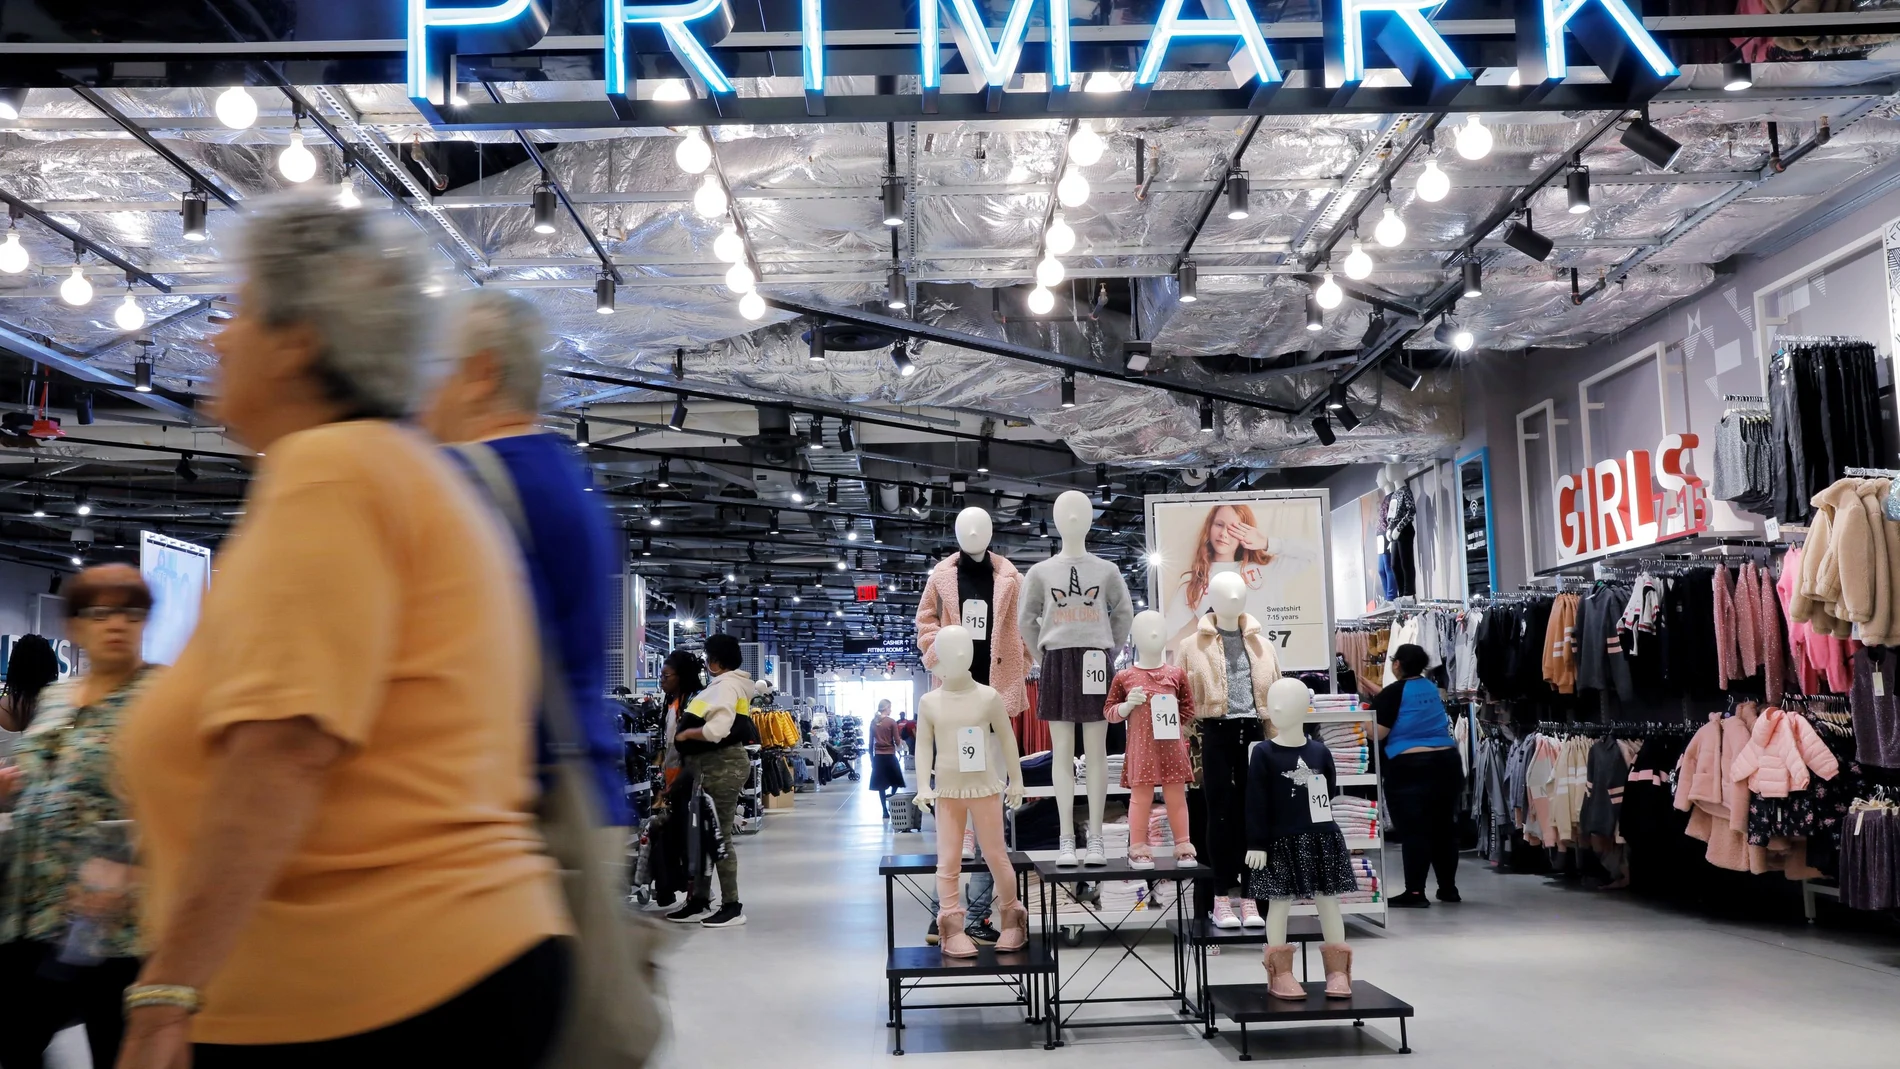 FILE PHOTO: Items for sale are displayed inside of a Primark store in the Brooklyn borough of New York